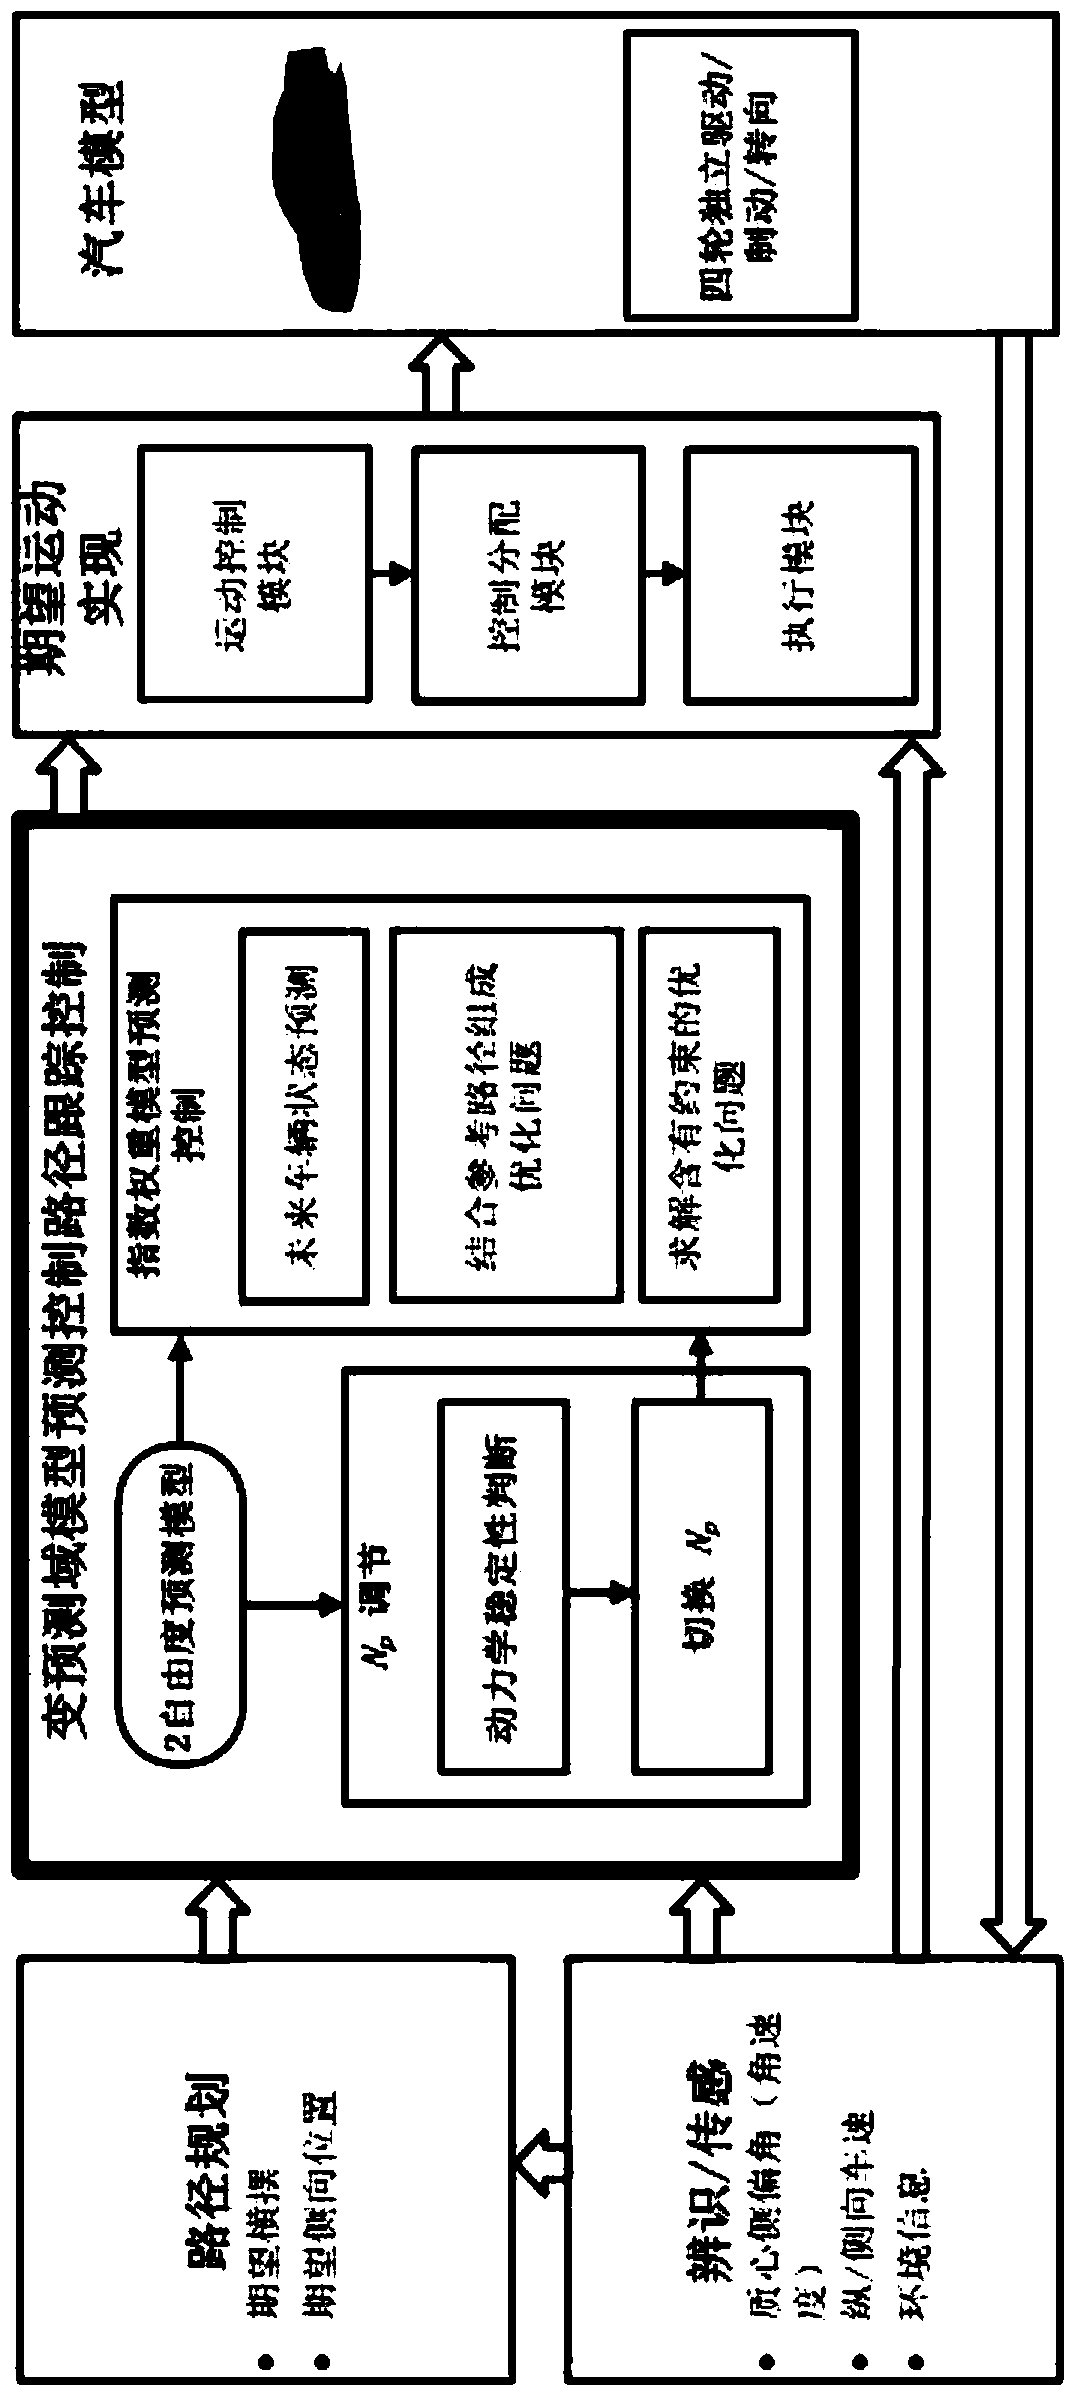 Full-line control electric vehicle path tracking control method